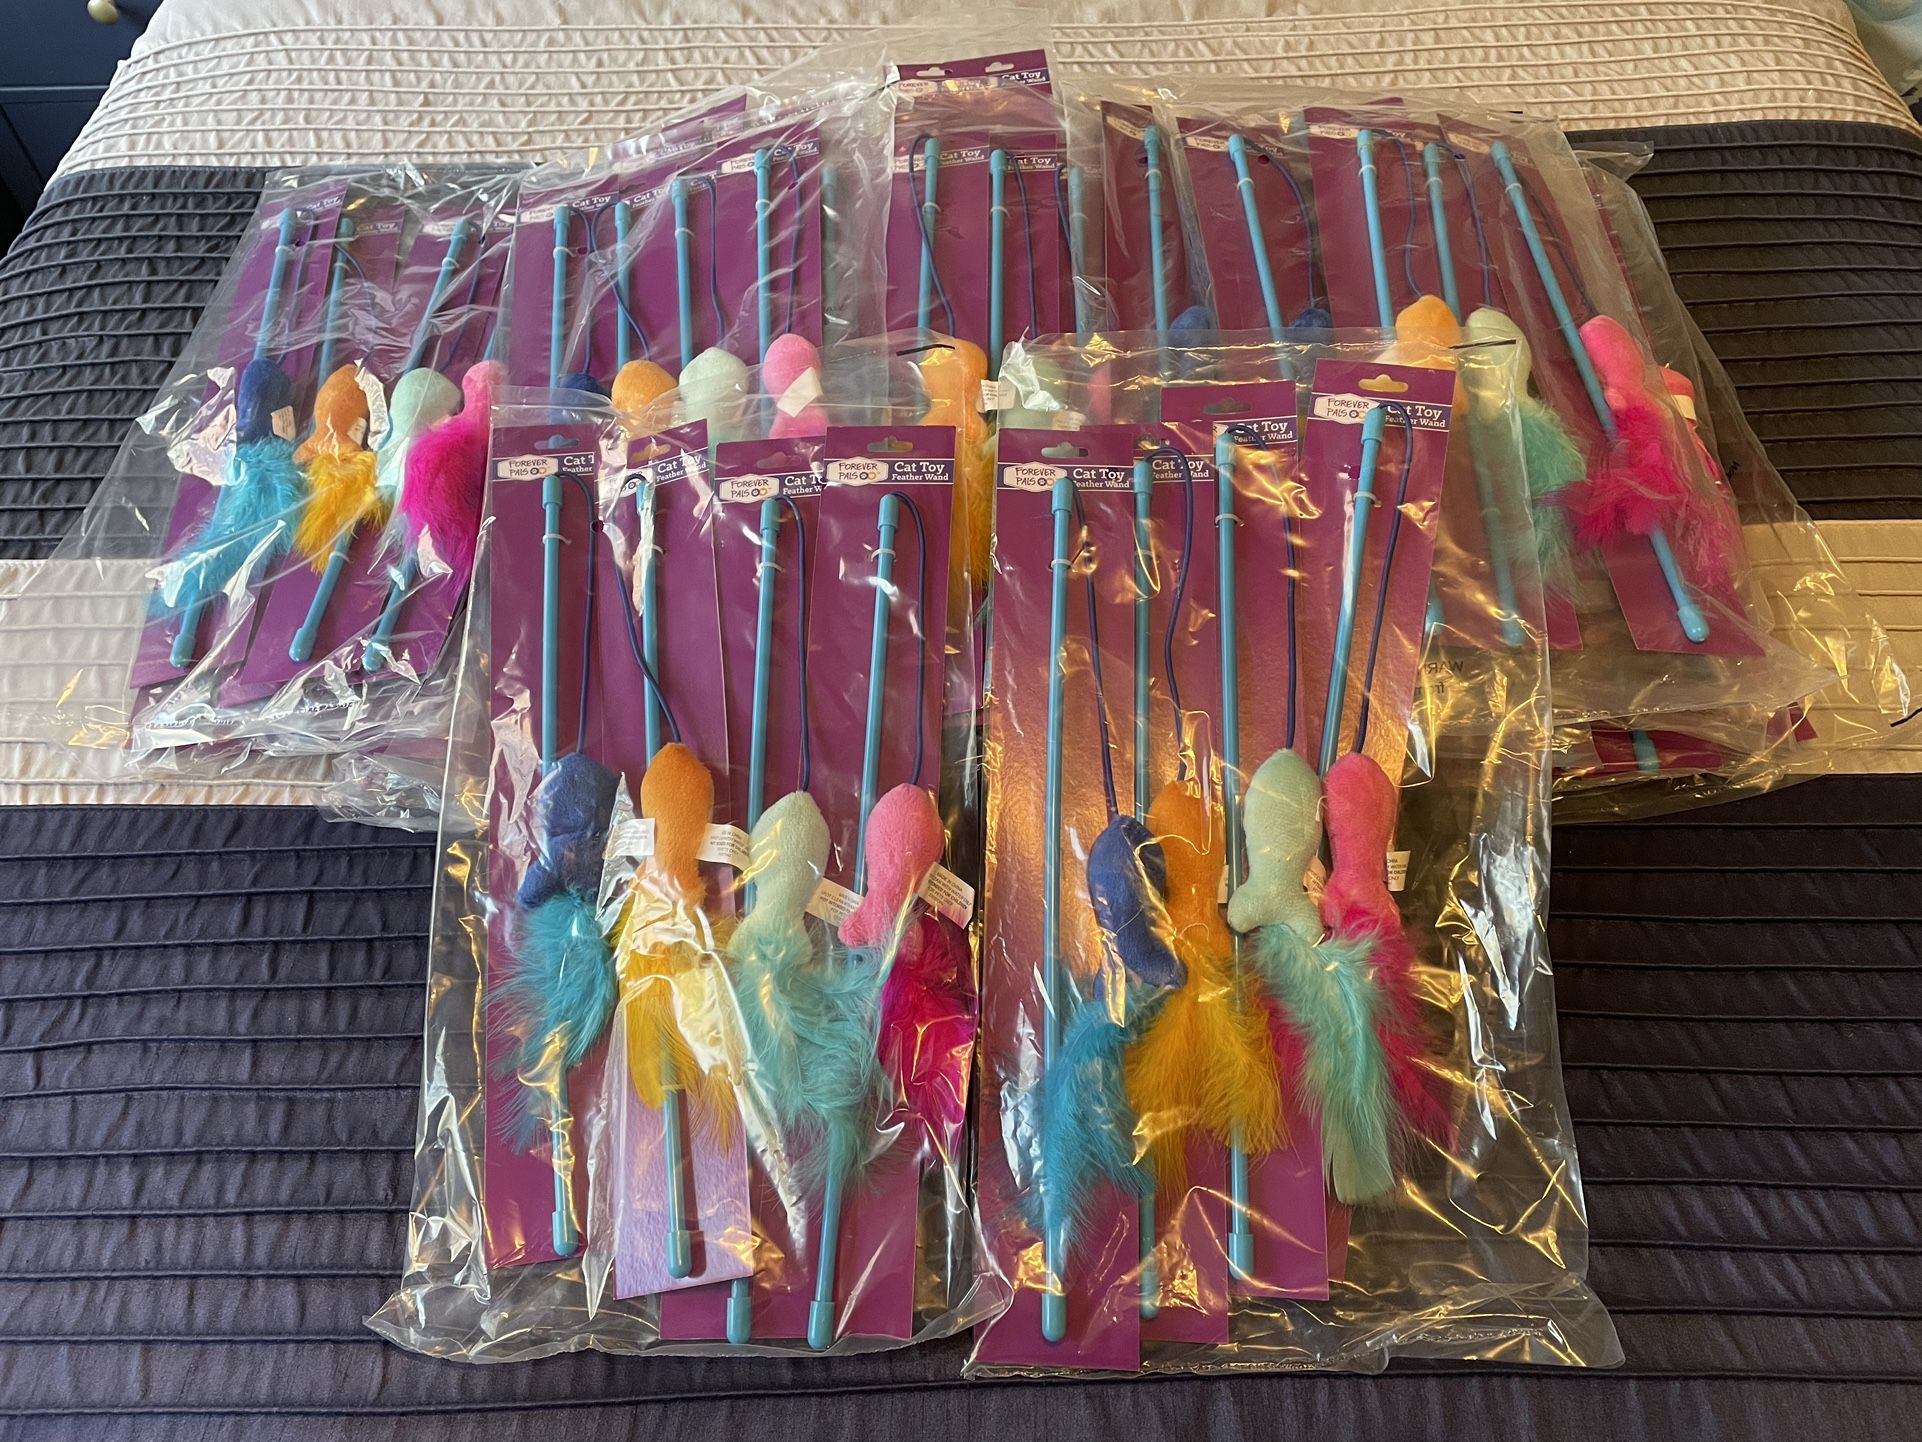 New cat toy wands. $0.50 each. Check my other listings for more great items!